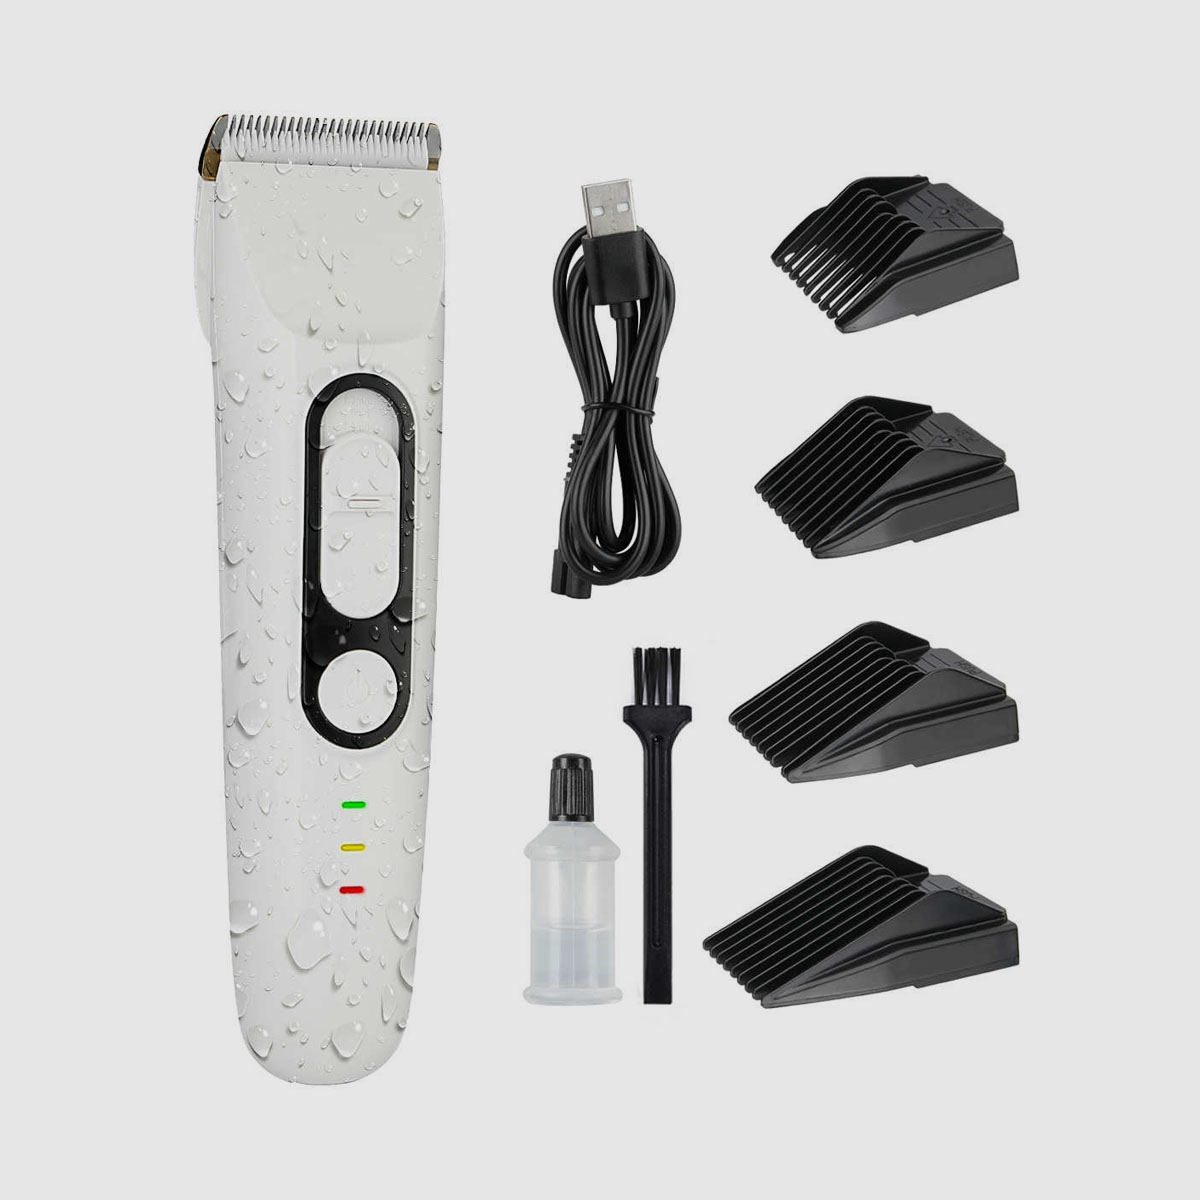 What to pay attention to when using electric hair clippers